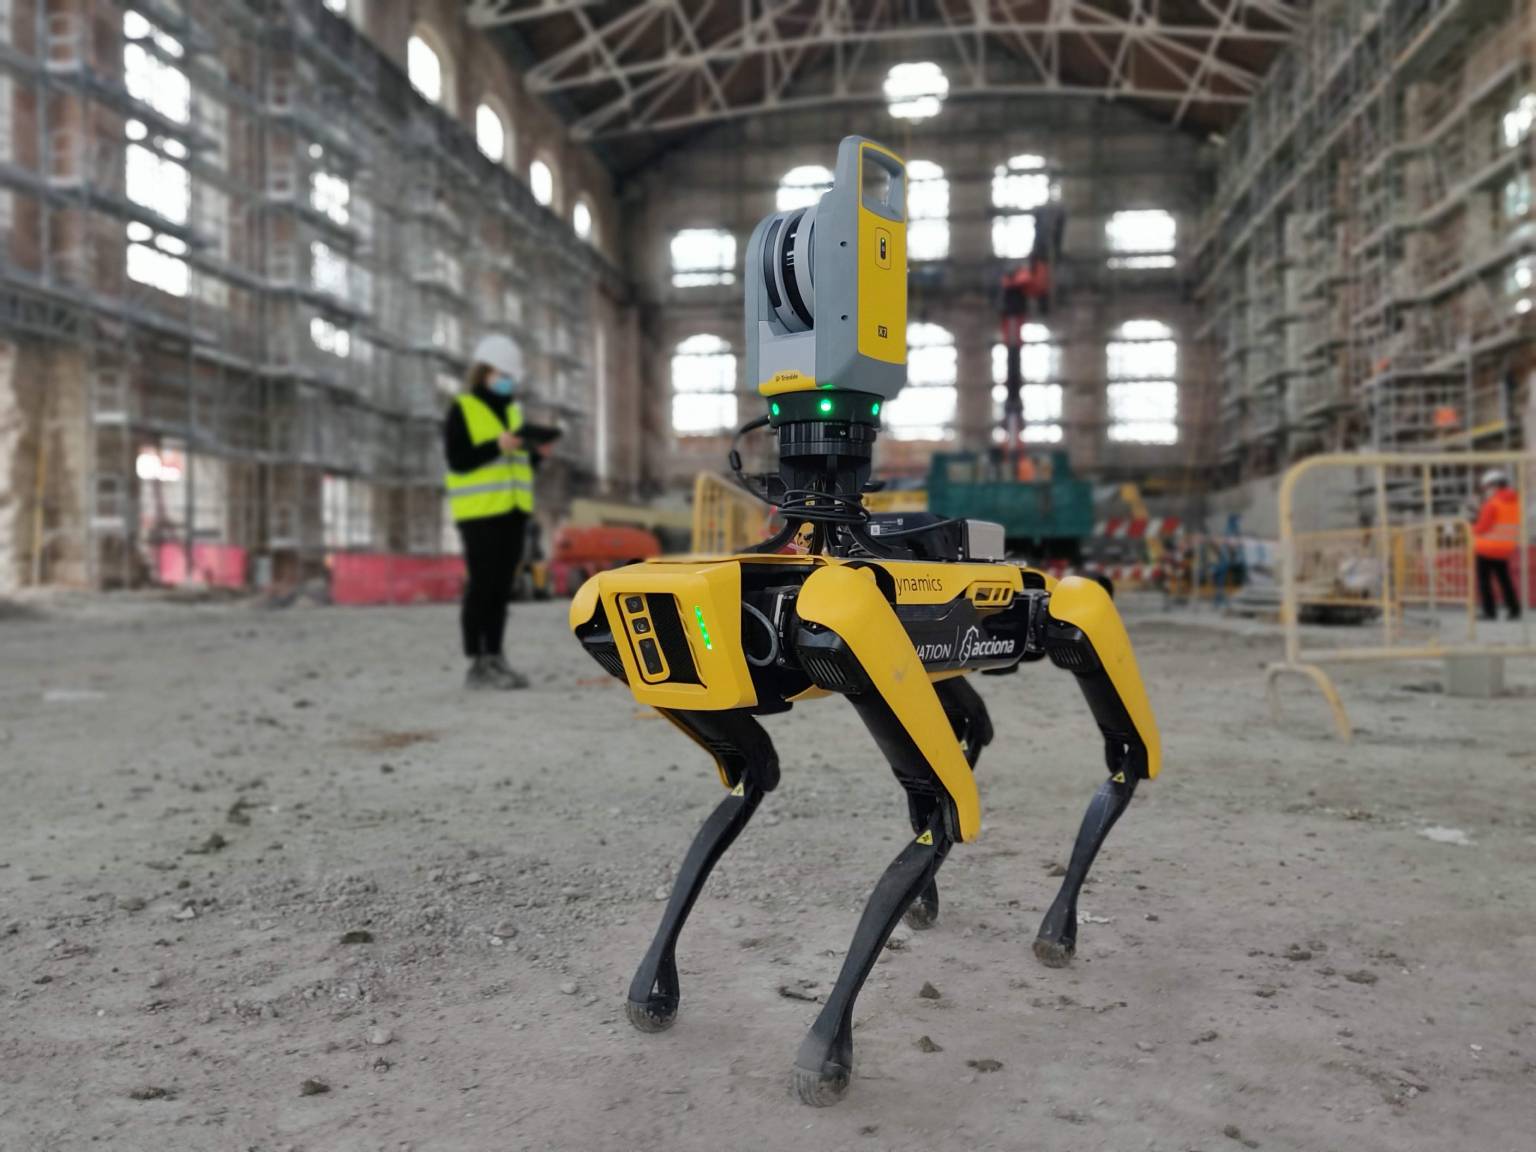 Spot at a construction work site with a laser scanning payload